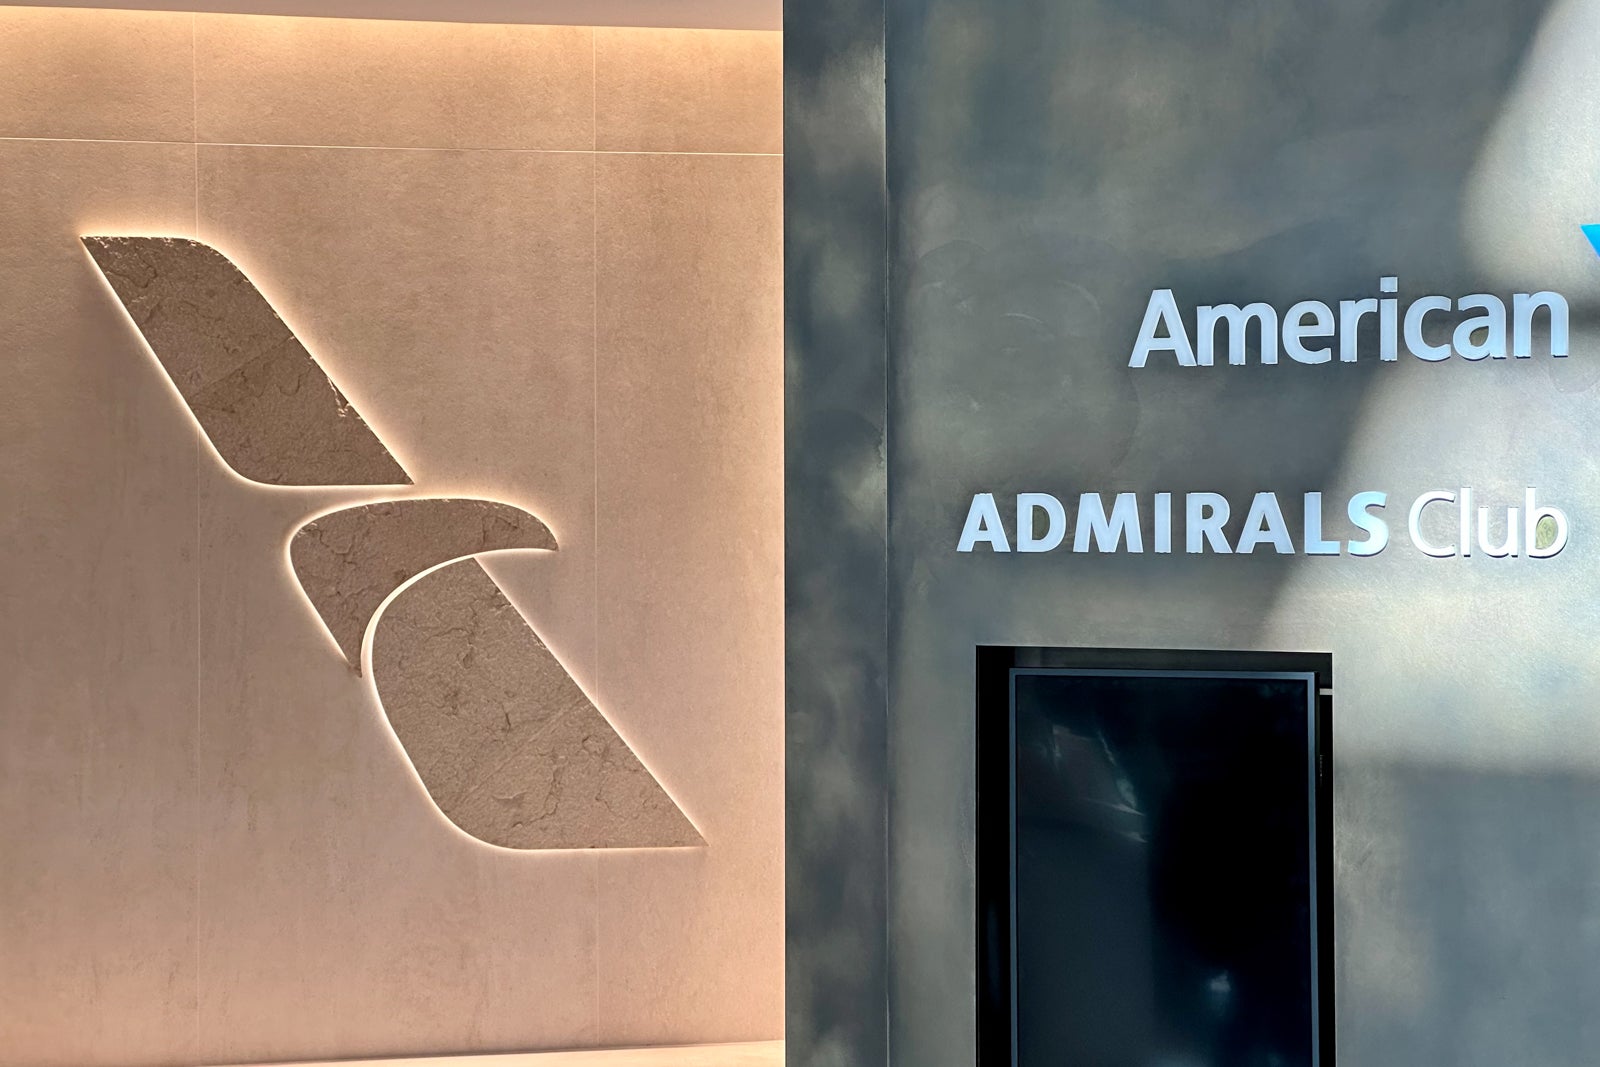 Use this Qantas Club sale to get American Admirals Club access for just $203